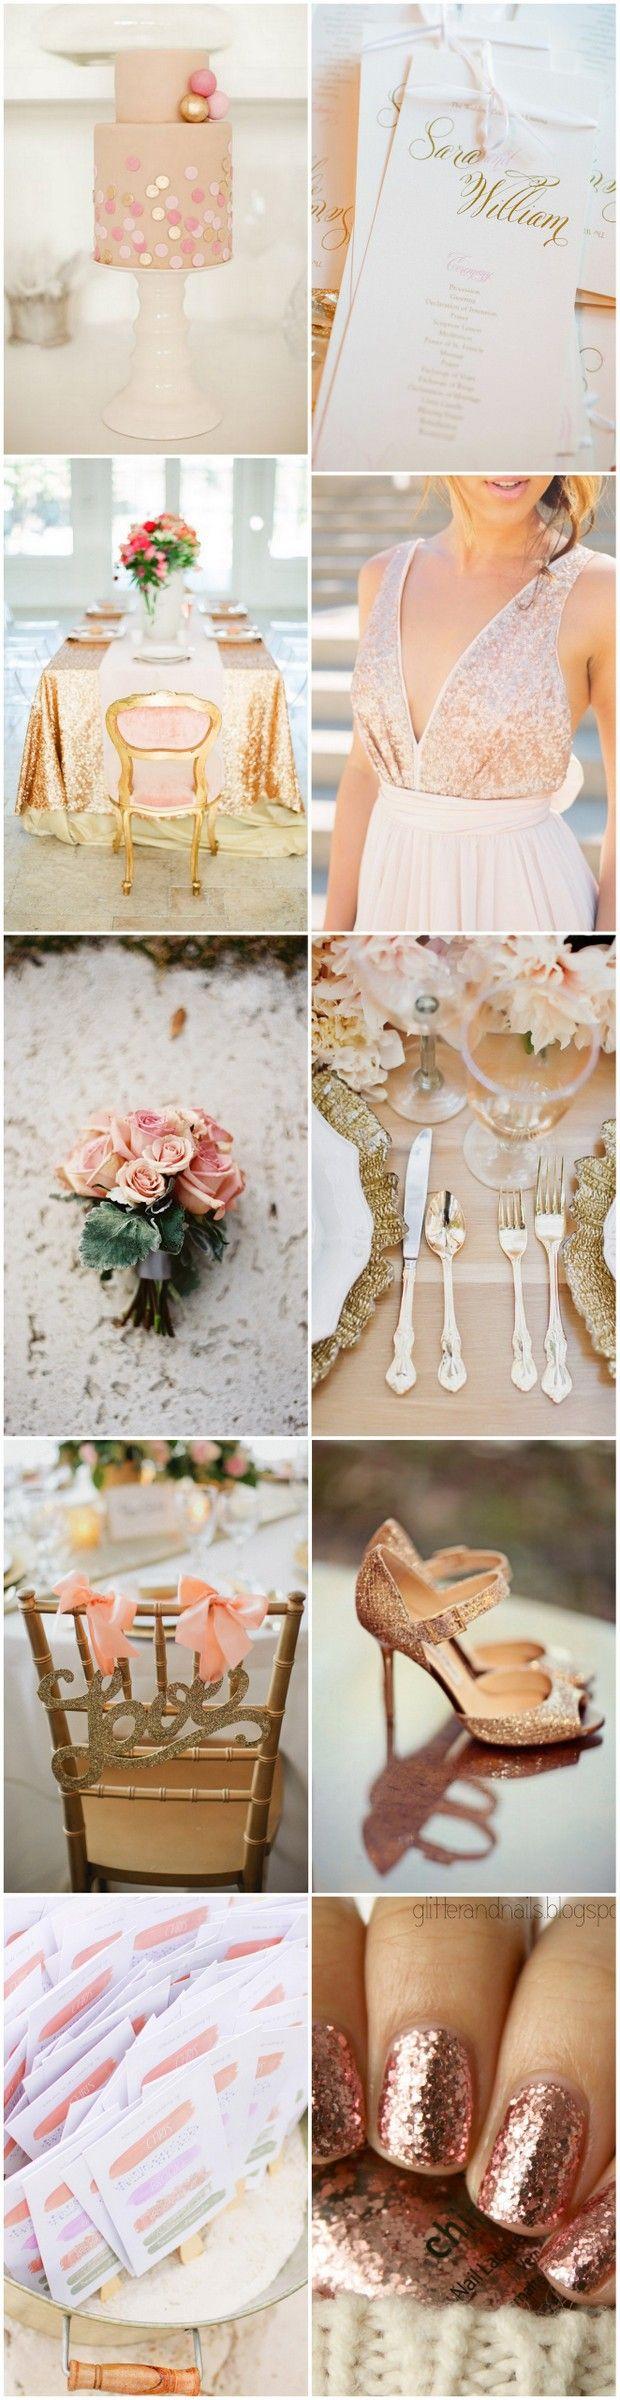 Mariage - Is There A Theme Or Color?